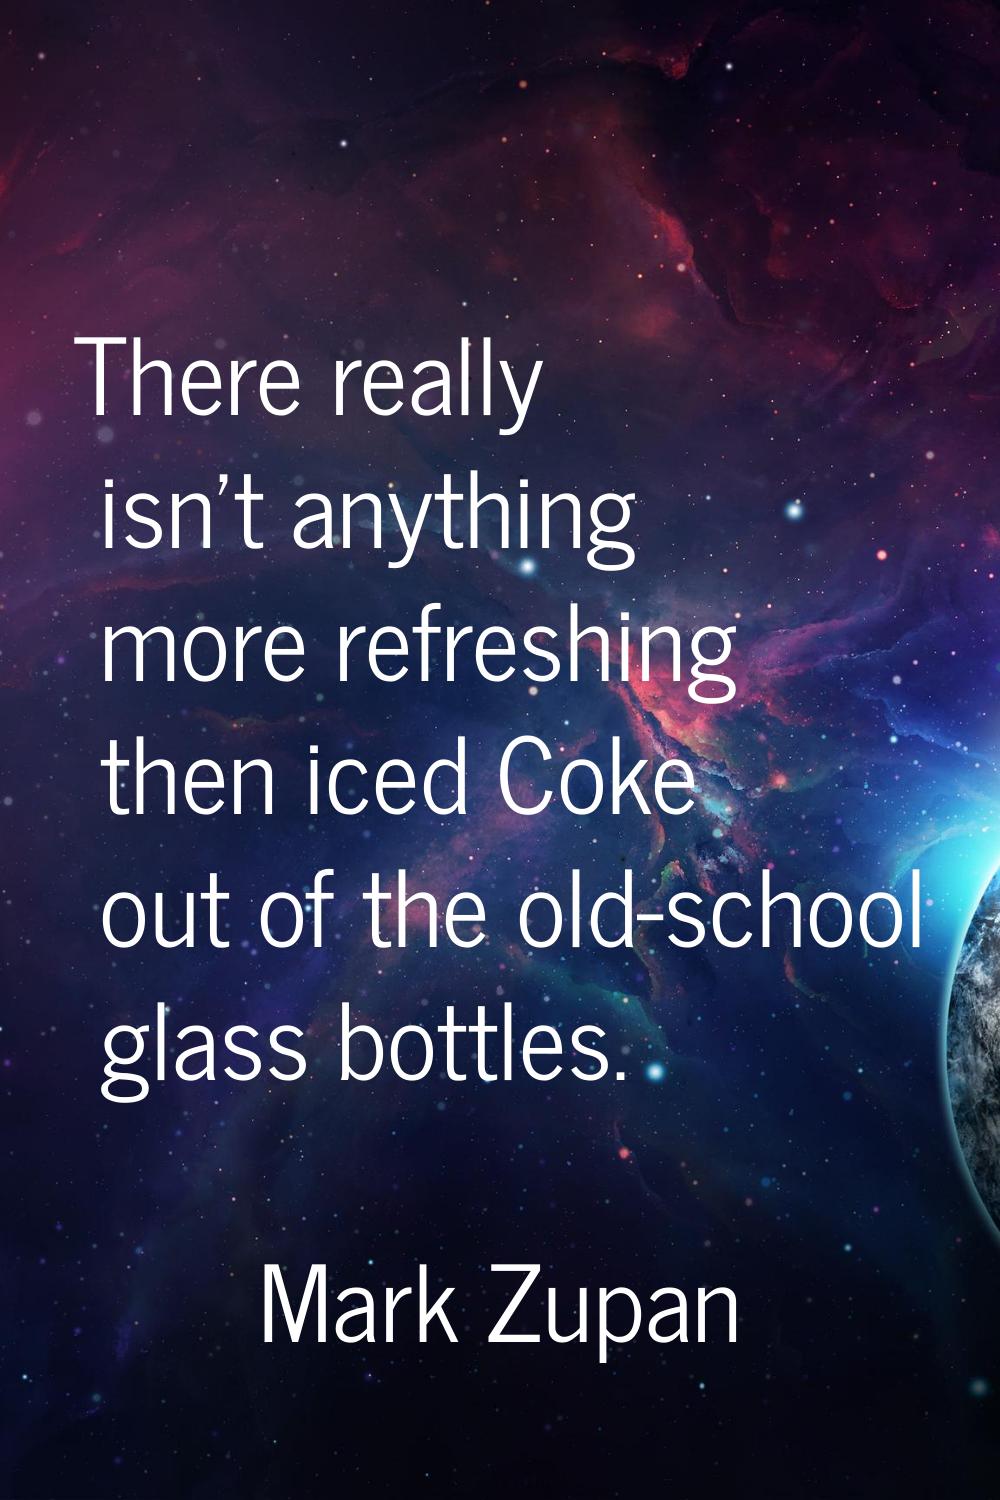 There really isn't anything more refreshing then iced Coke out of the old-school glass bottles.